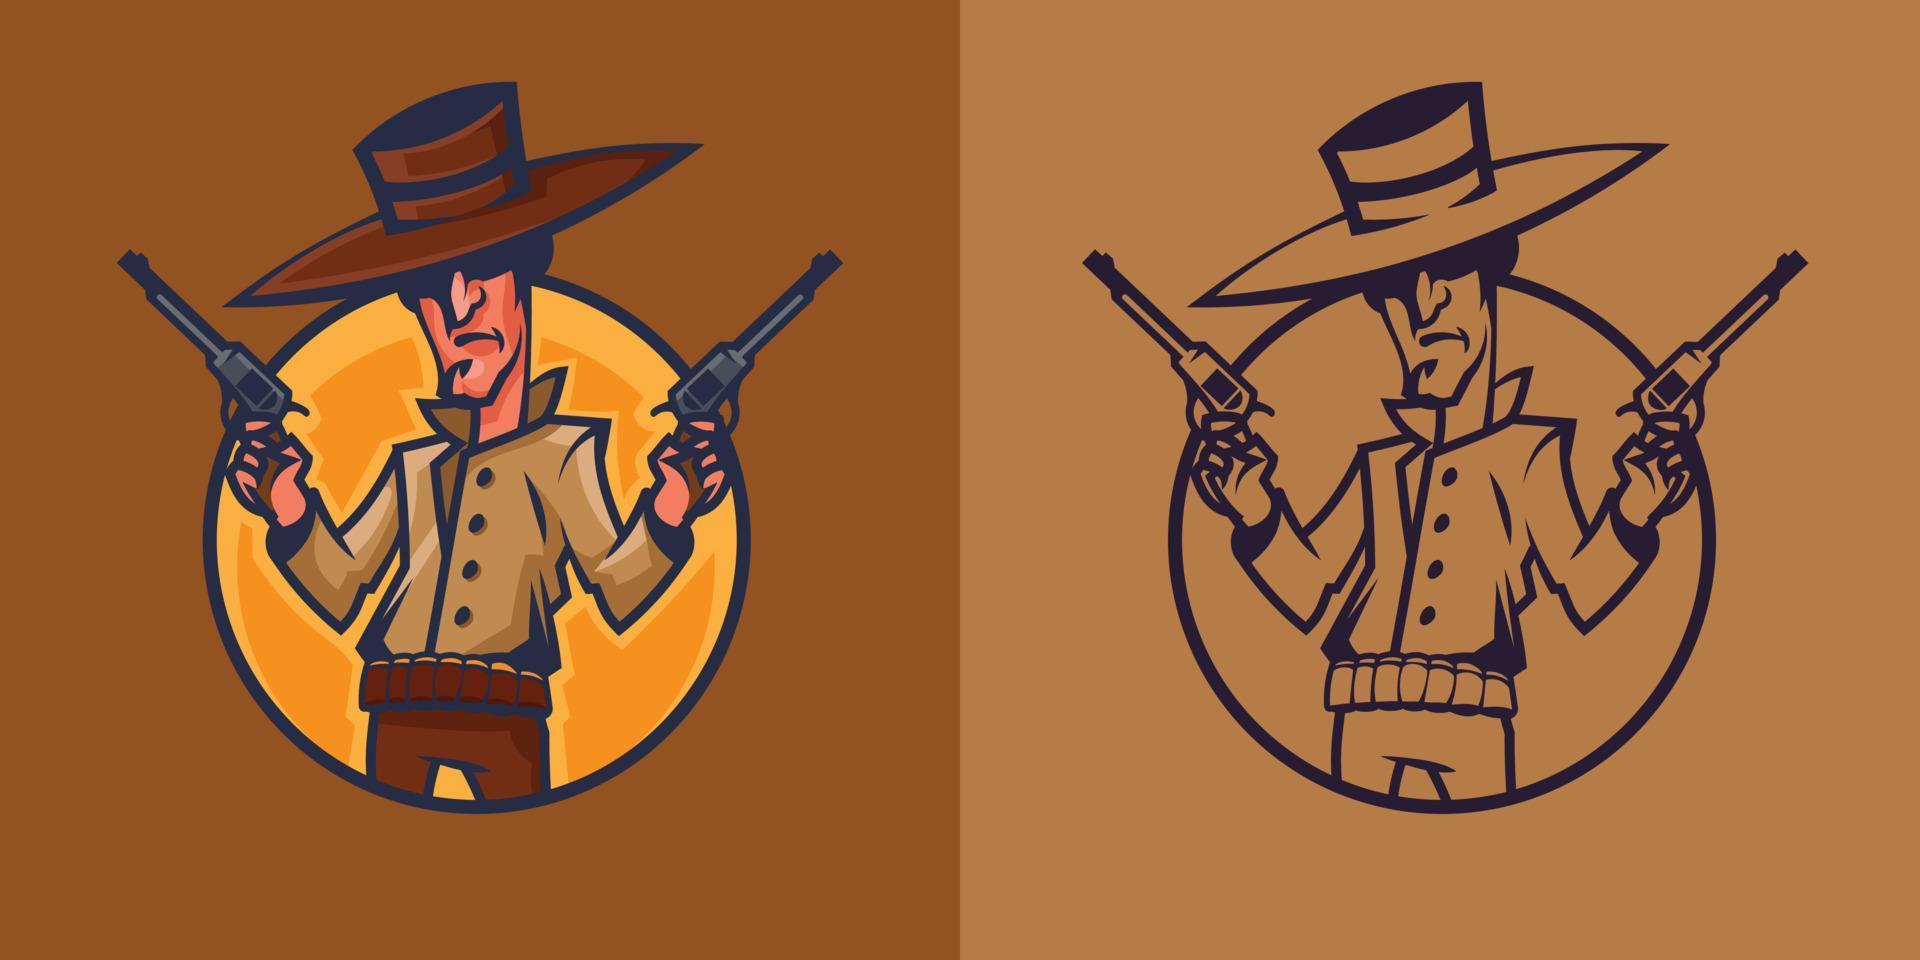 Cowboy holding revolvers in different styles. vector